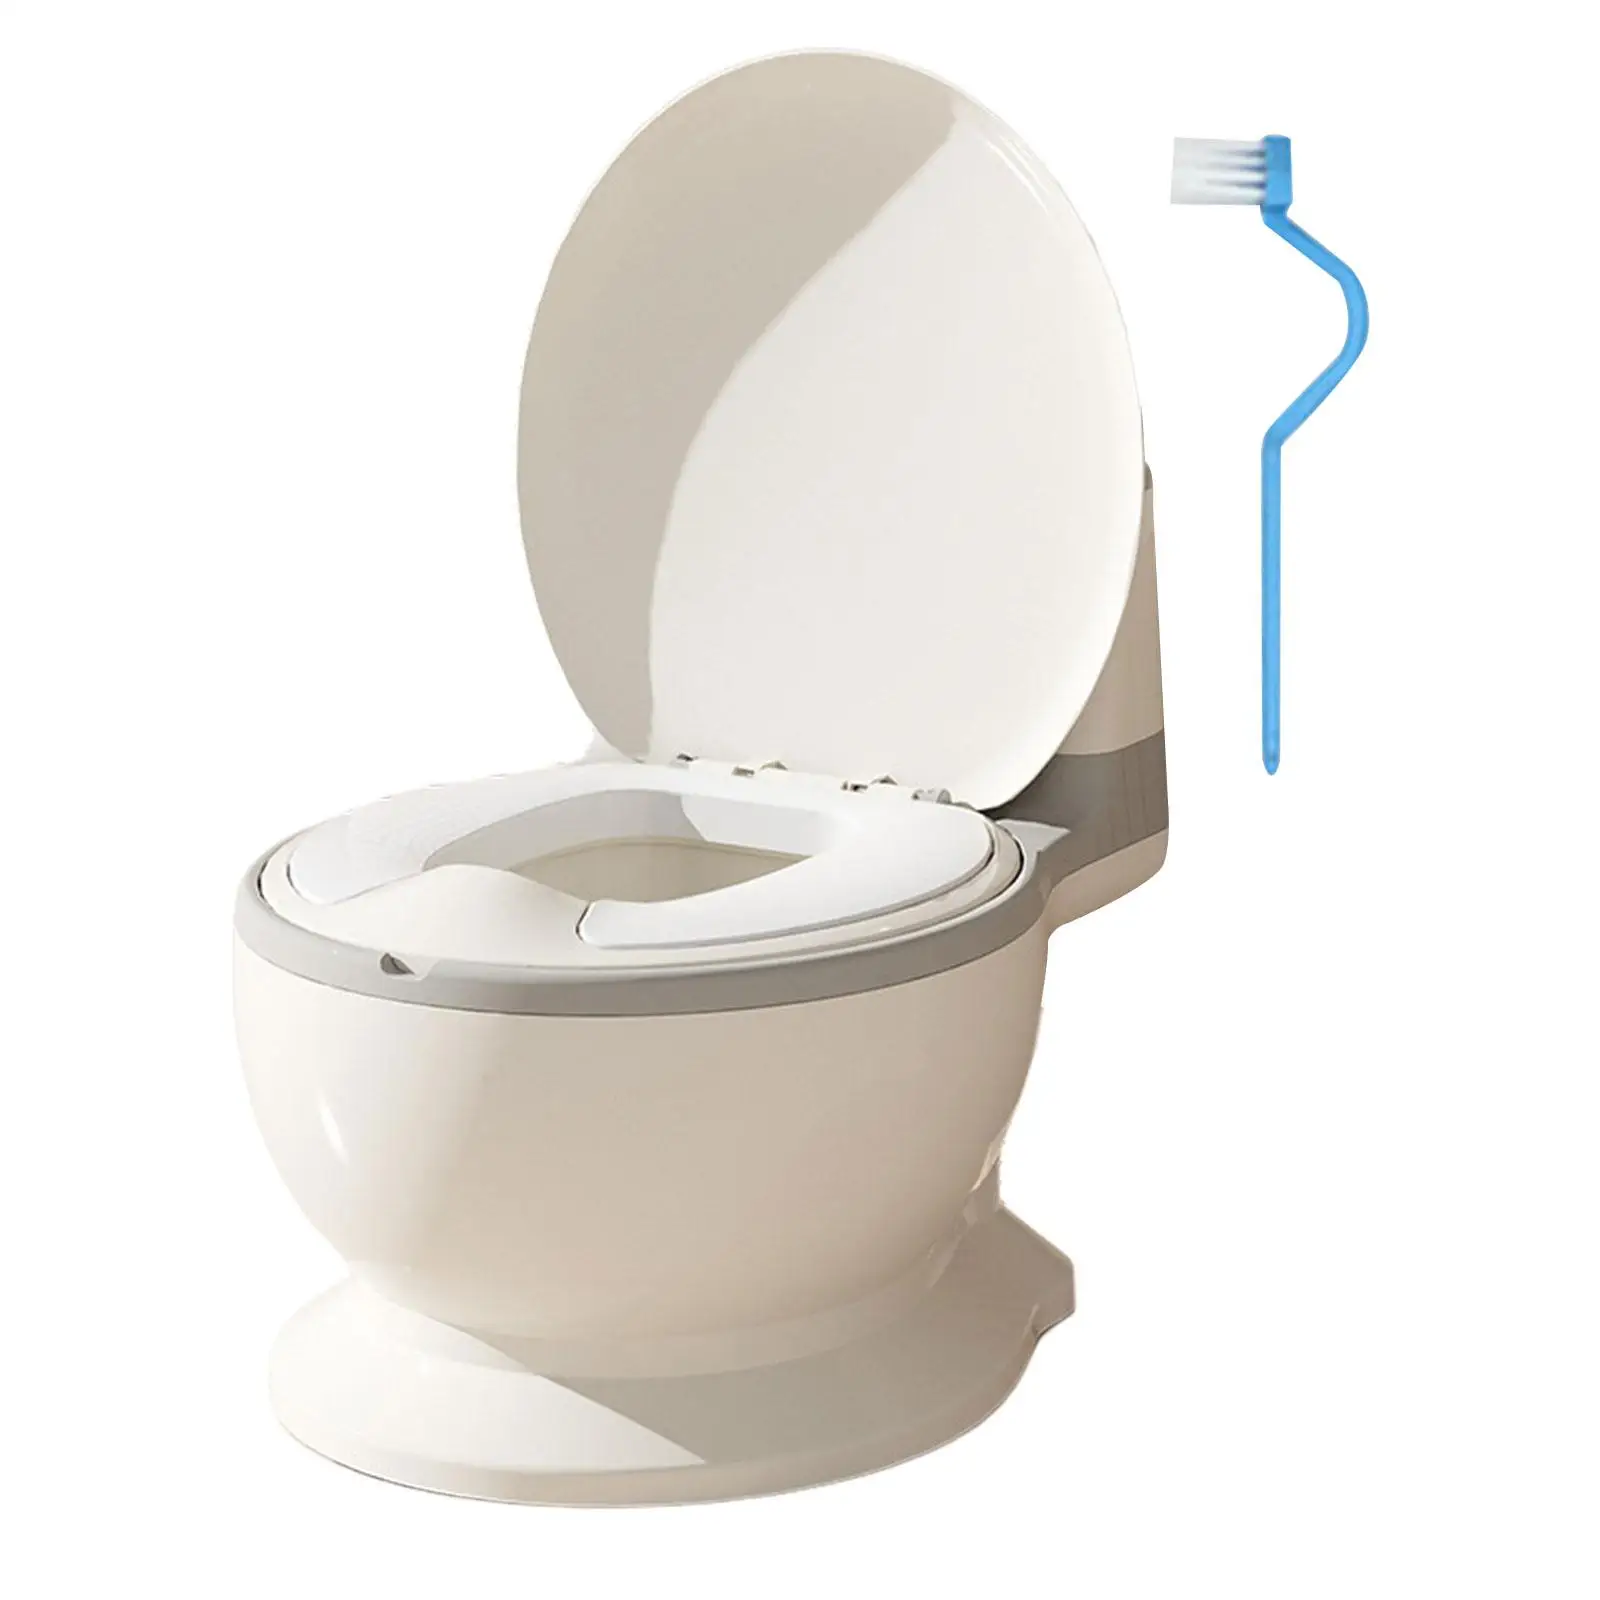 Toilet Training Potty Compact Size with Spilling Guard Kids Potty Chair Potty Seat Infants Toilet Seat for Bedroom Girls Boys